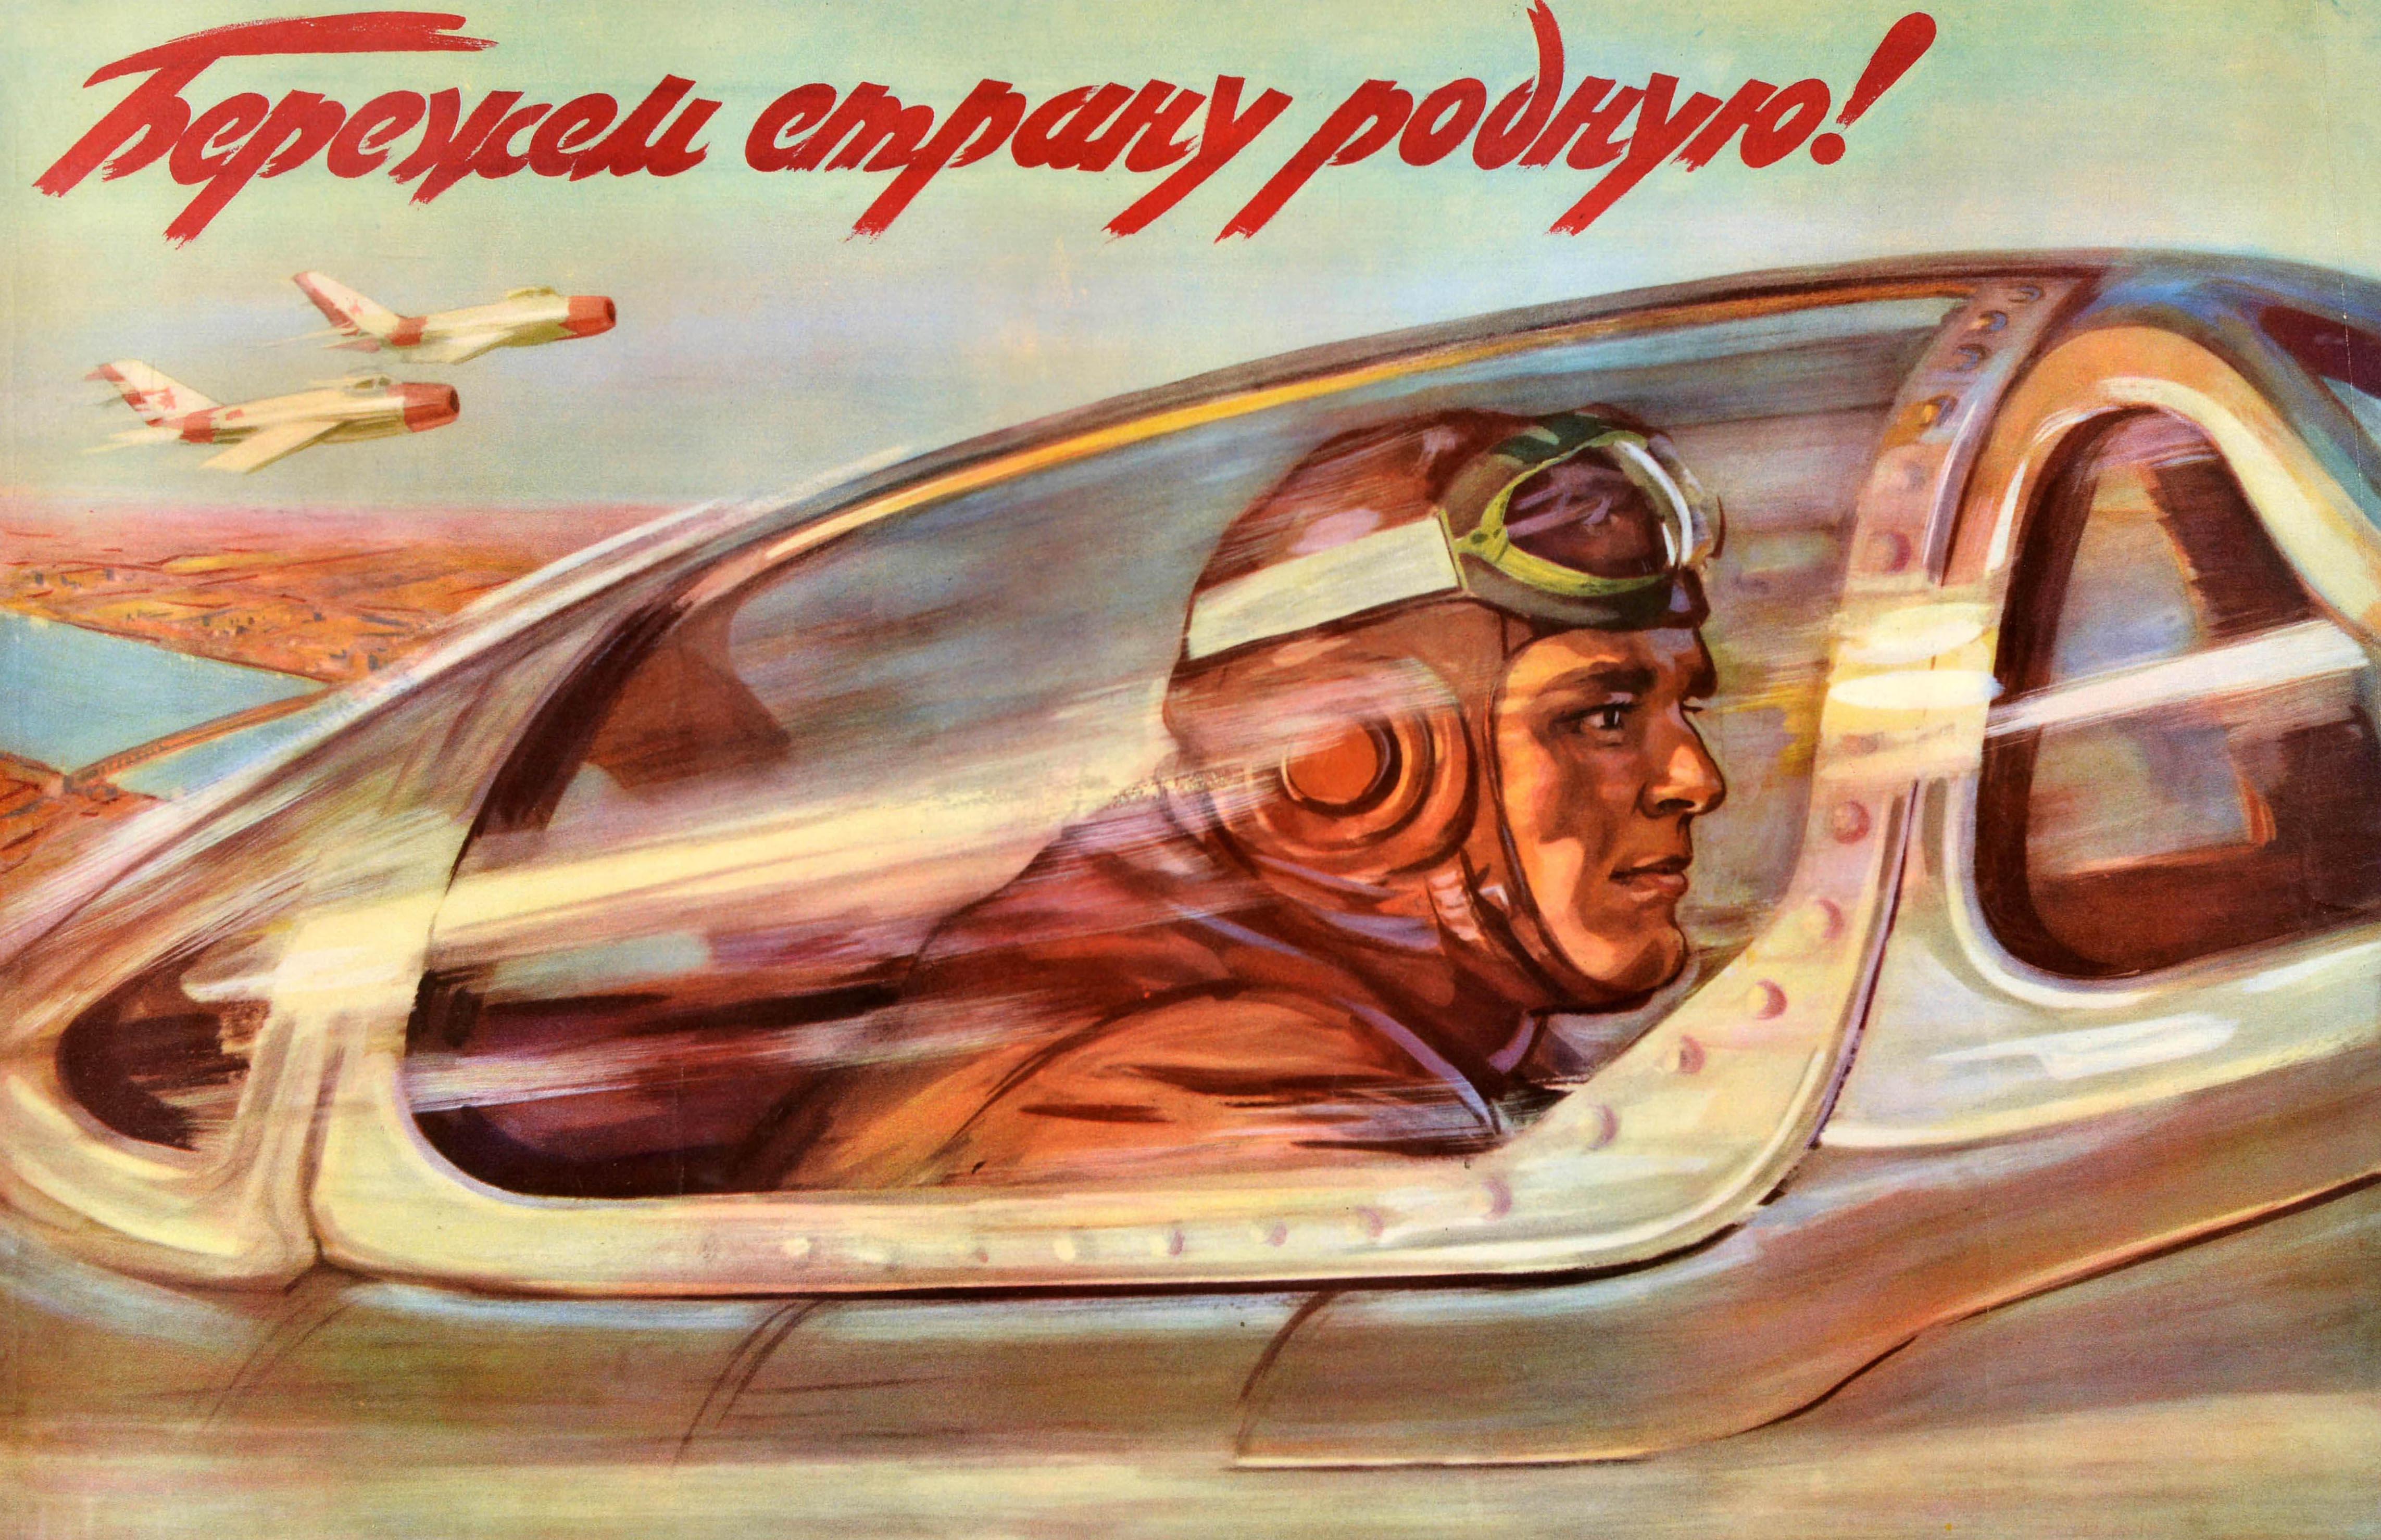 Original vintage Soviet military propaganda poster - Let's Protect Our Country / Бережем страну родную! - featuring a dynamic illustration of a pilot in a cockpit of a plane flying at speed in the foreground with more fighter jets below the stylised